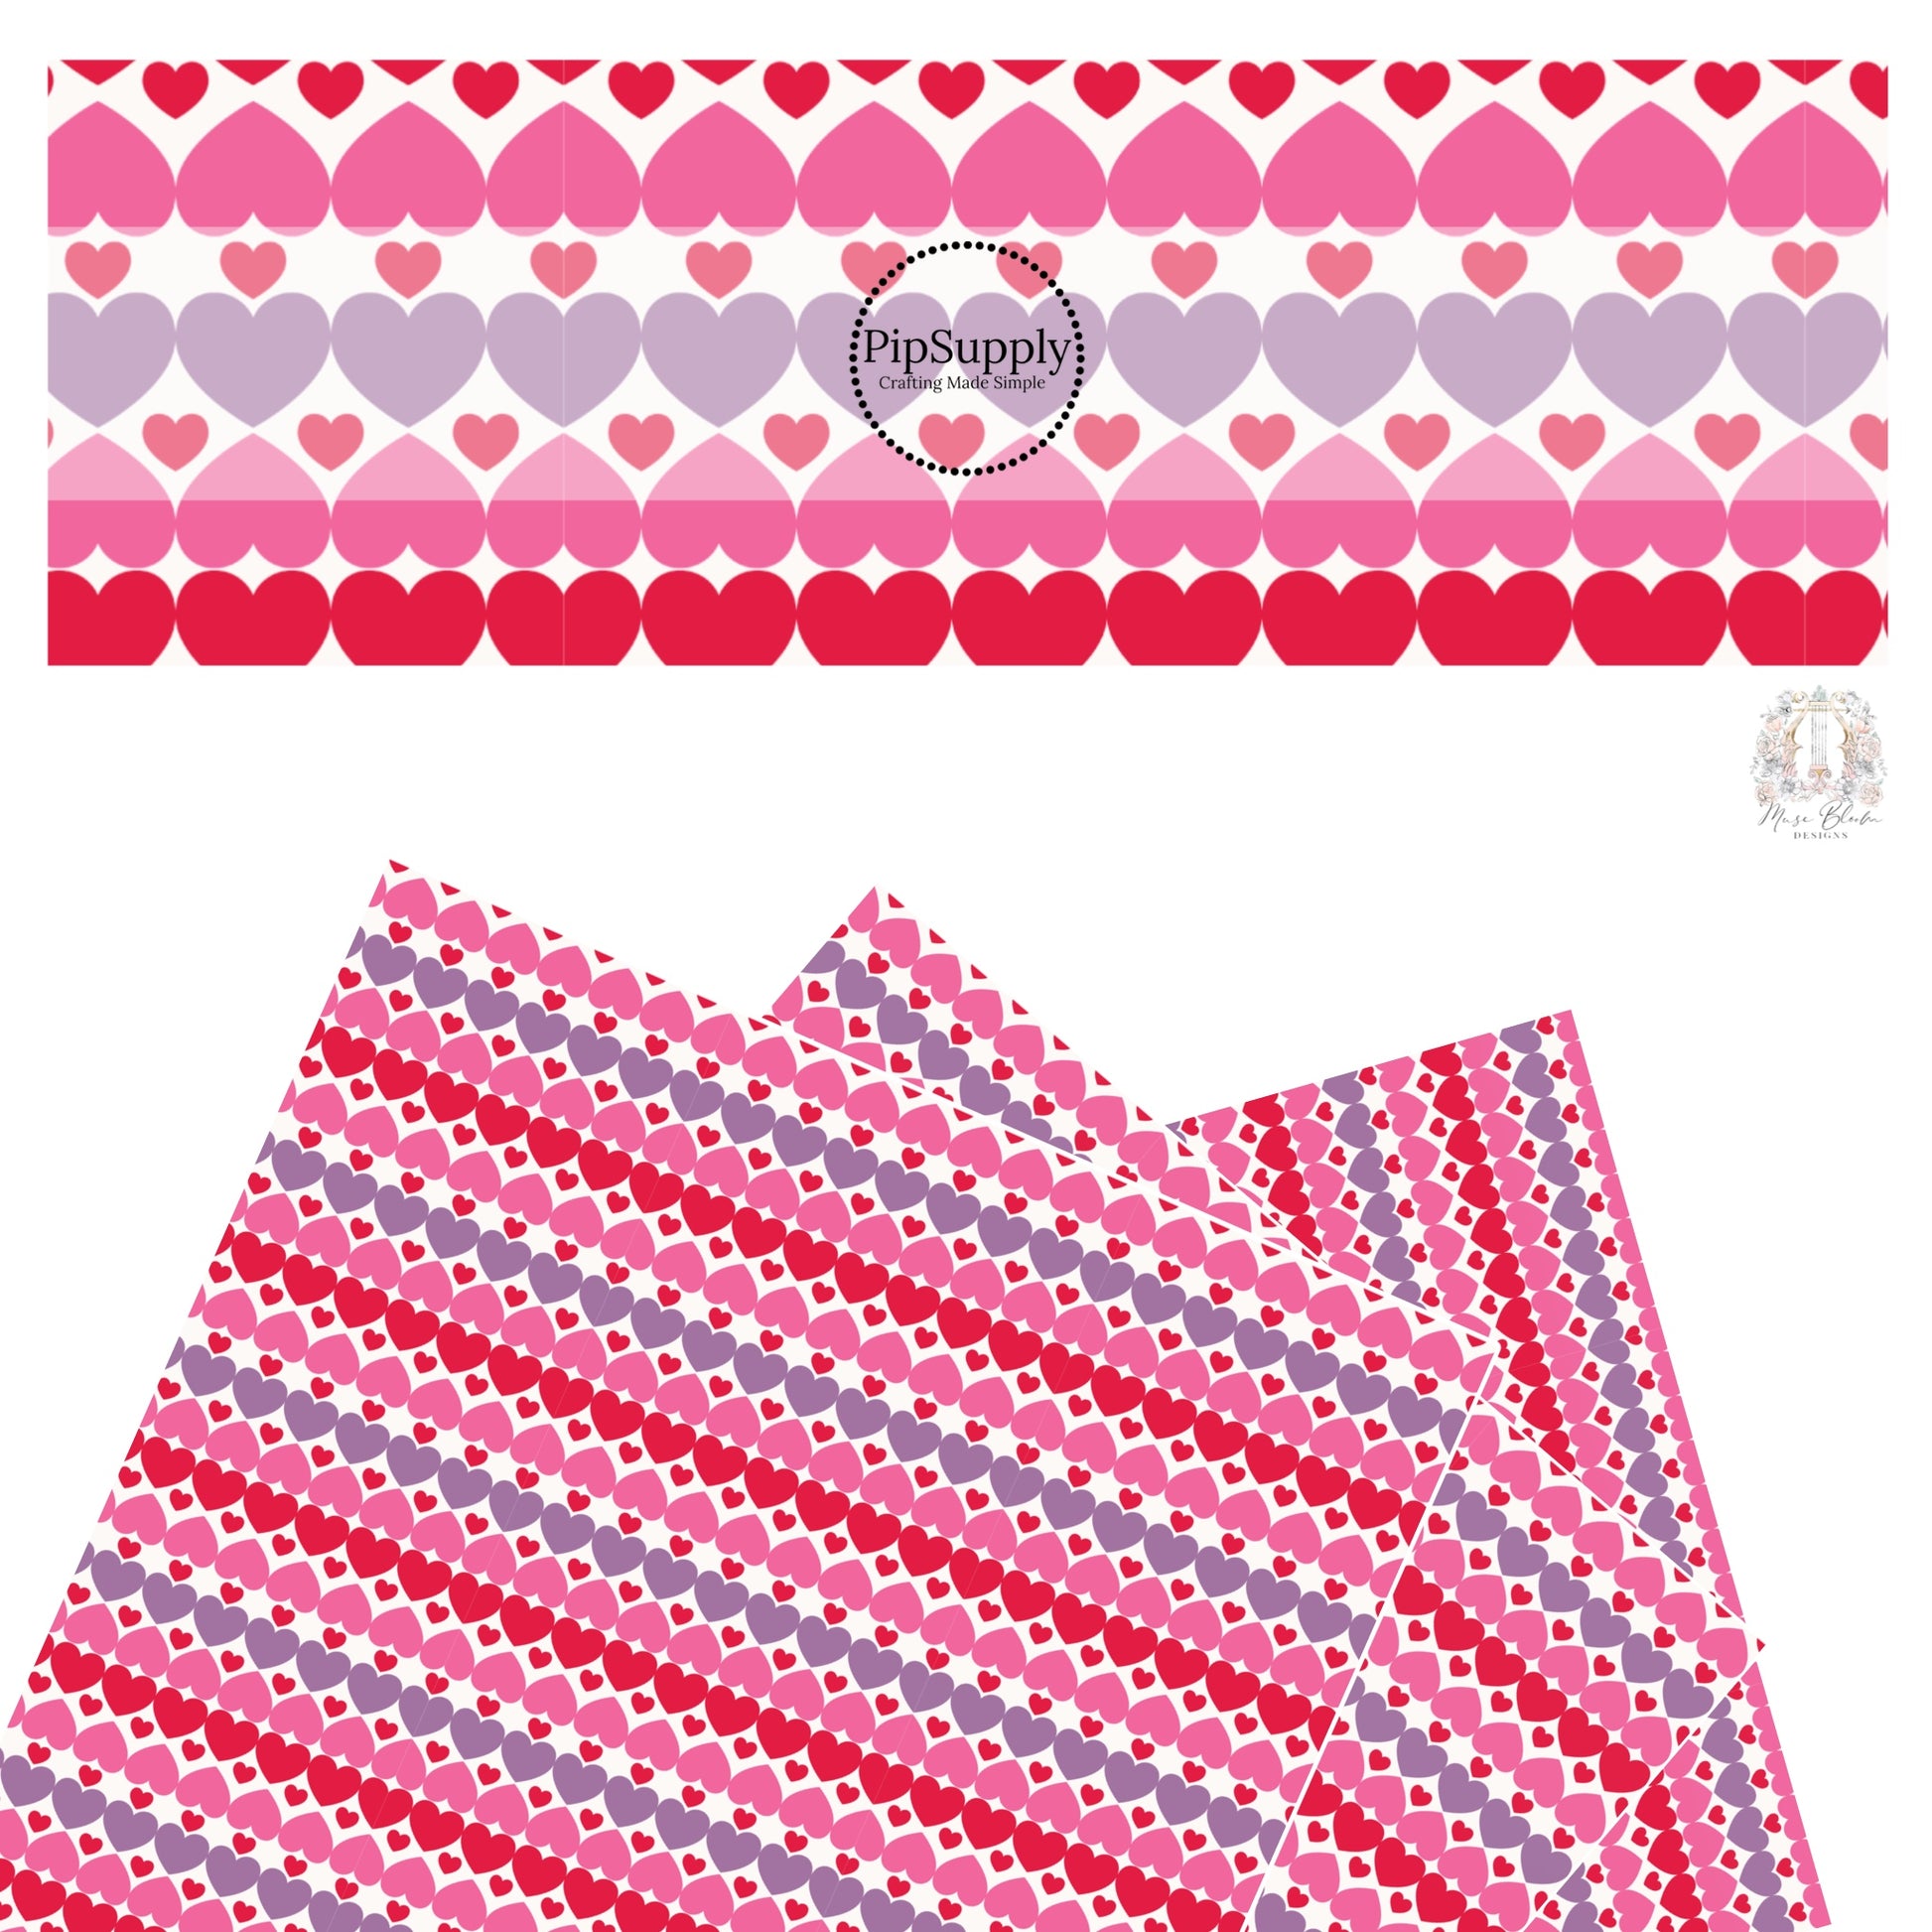 These Valentine's pattern themed faux leather sheets contain the following design elements: rows of red, purple, and pink hearts on white. Our CPSIA compliant faux leather sheets or rolls can be used for all types of crafting projects.